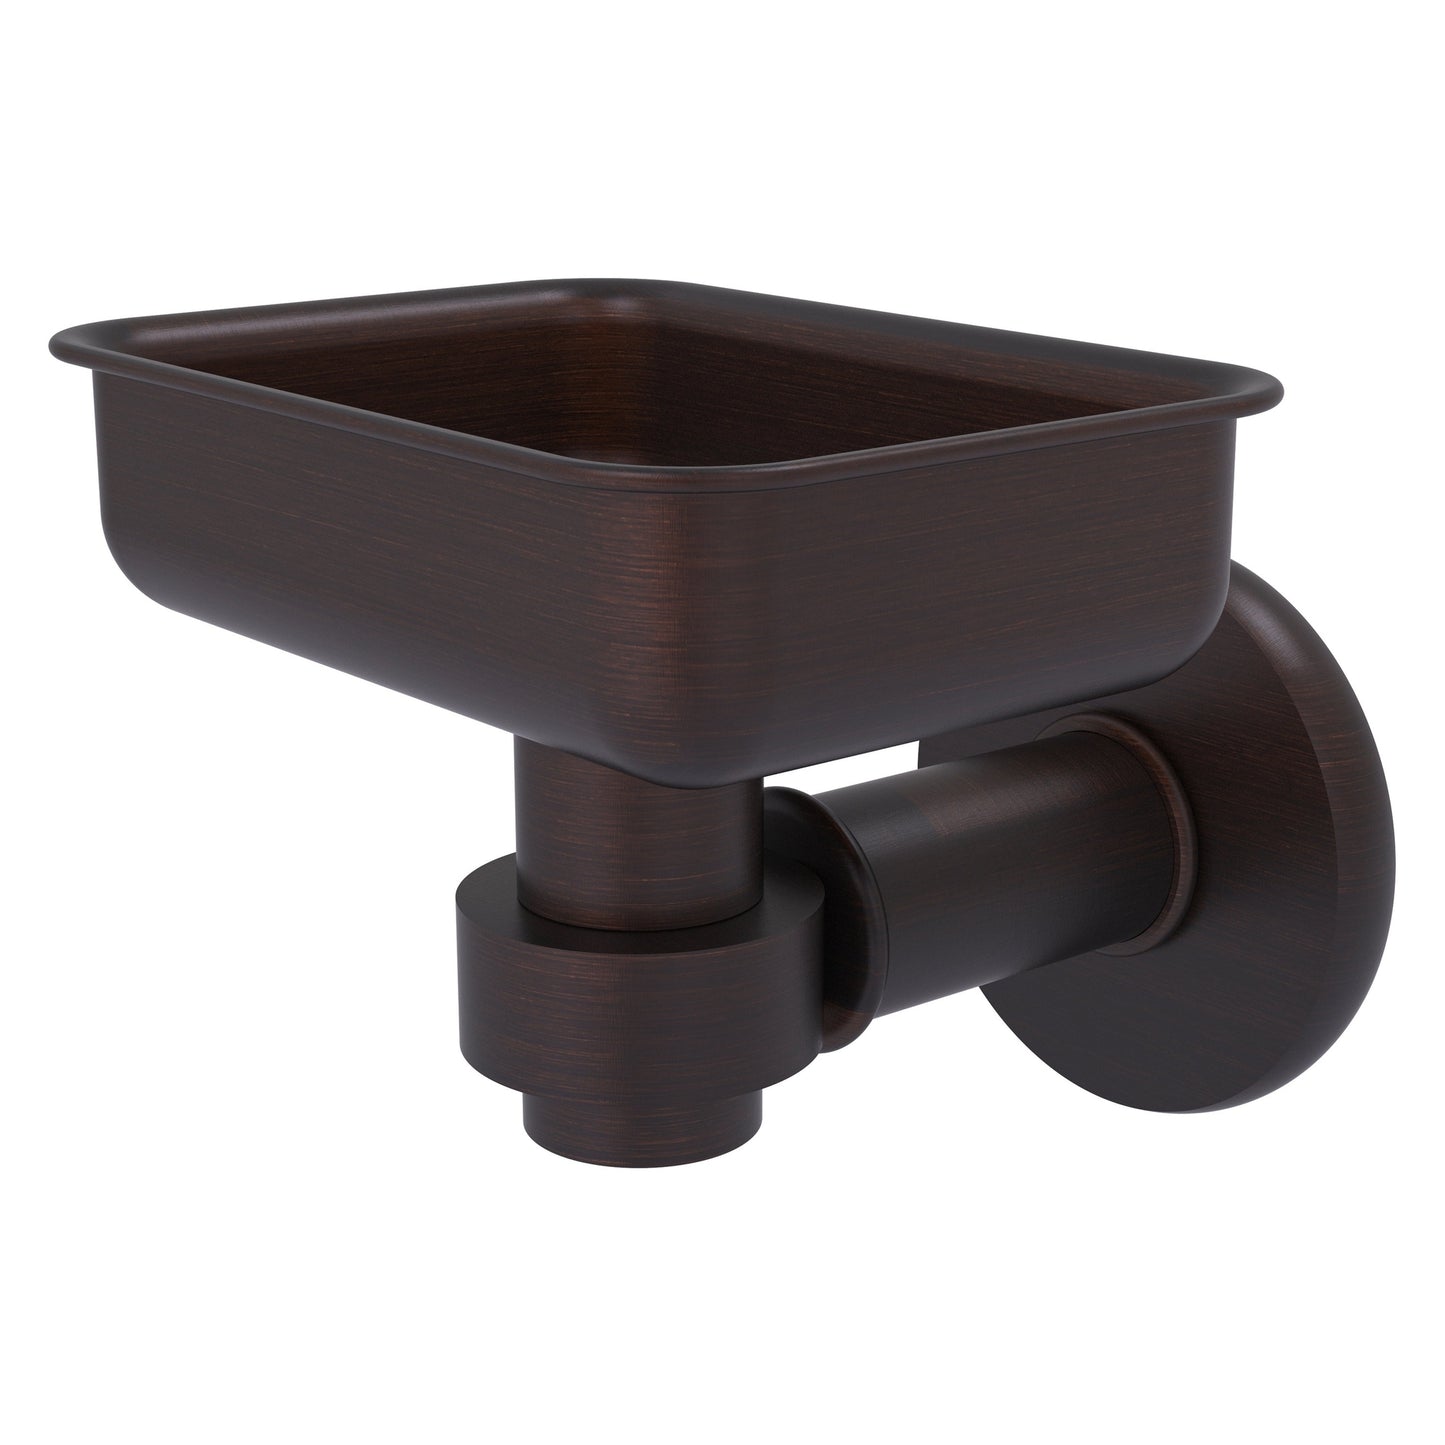 Allied Brass Continental 4.5" x 3.5" Venetian Bronze Solid Brass Wall-Mounted Soap Dish Holder